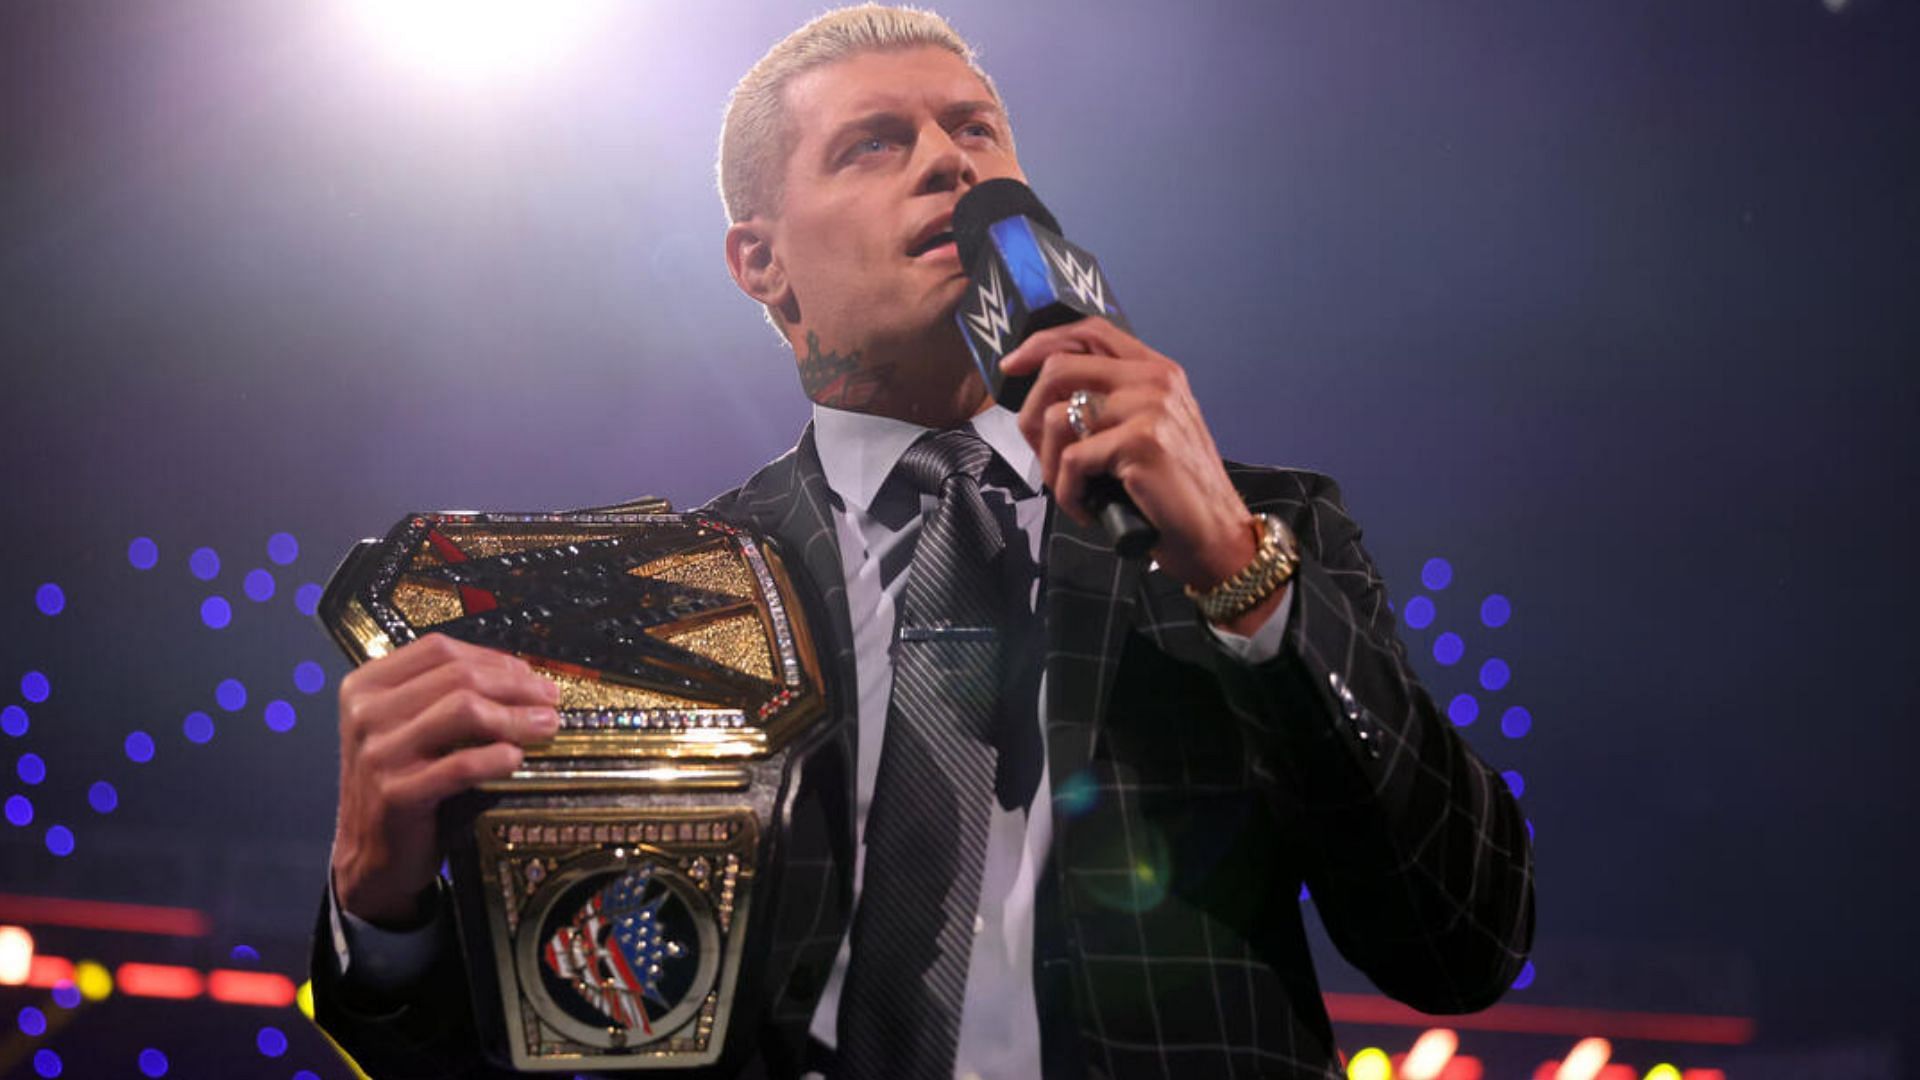 Cody Rhodes cutting a promo on SmackDown.